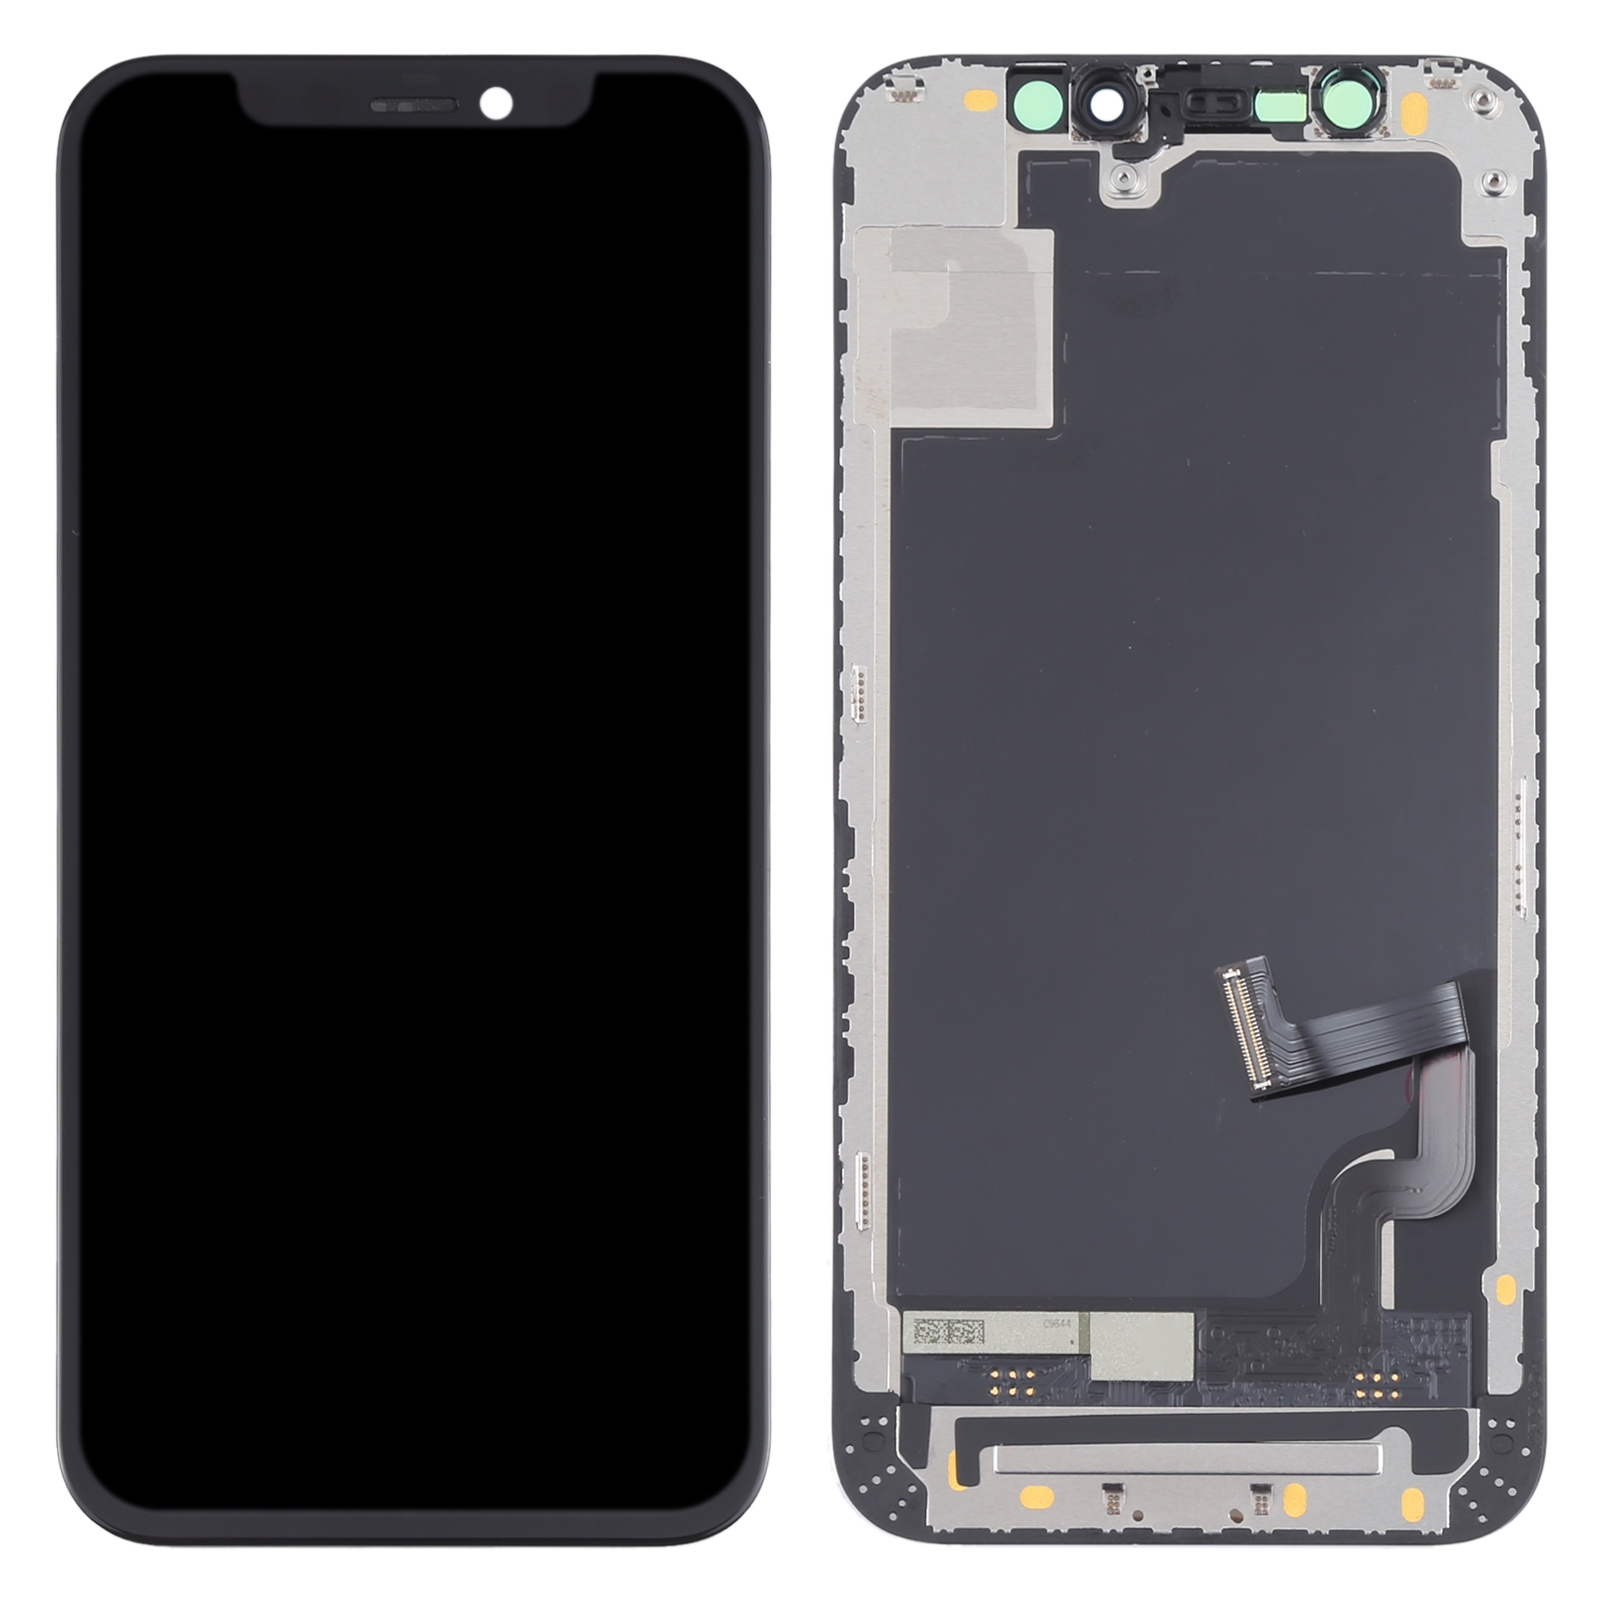 IC Removable Version Hard OLED Screen Replacement for iPhone 12 Mini Black